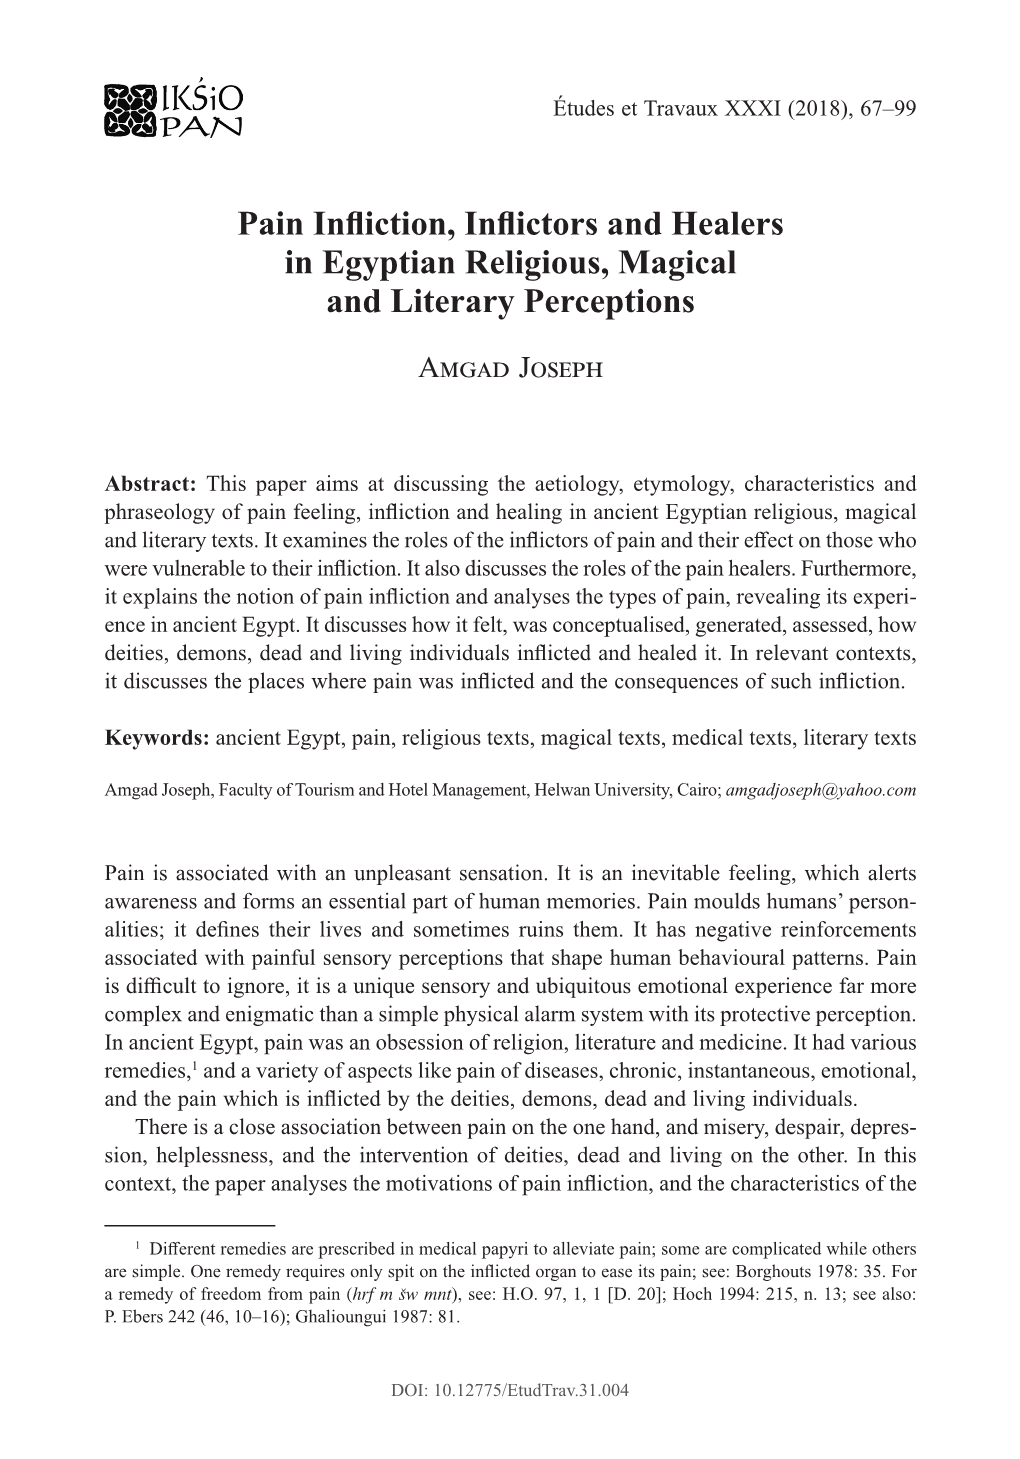 Pain Infliction, Inflictors and Healers in Egyptian Religious, Magical And